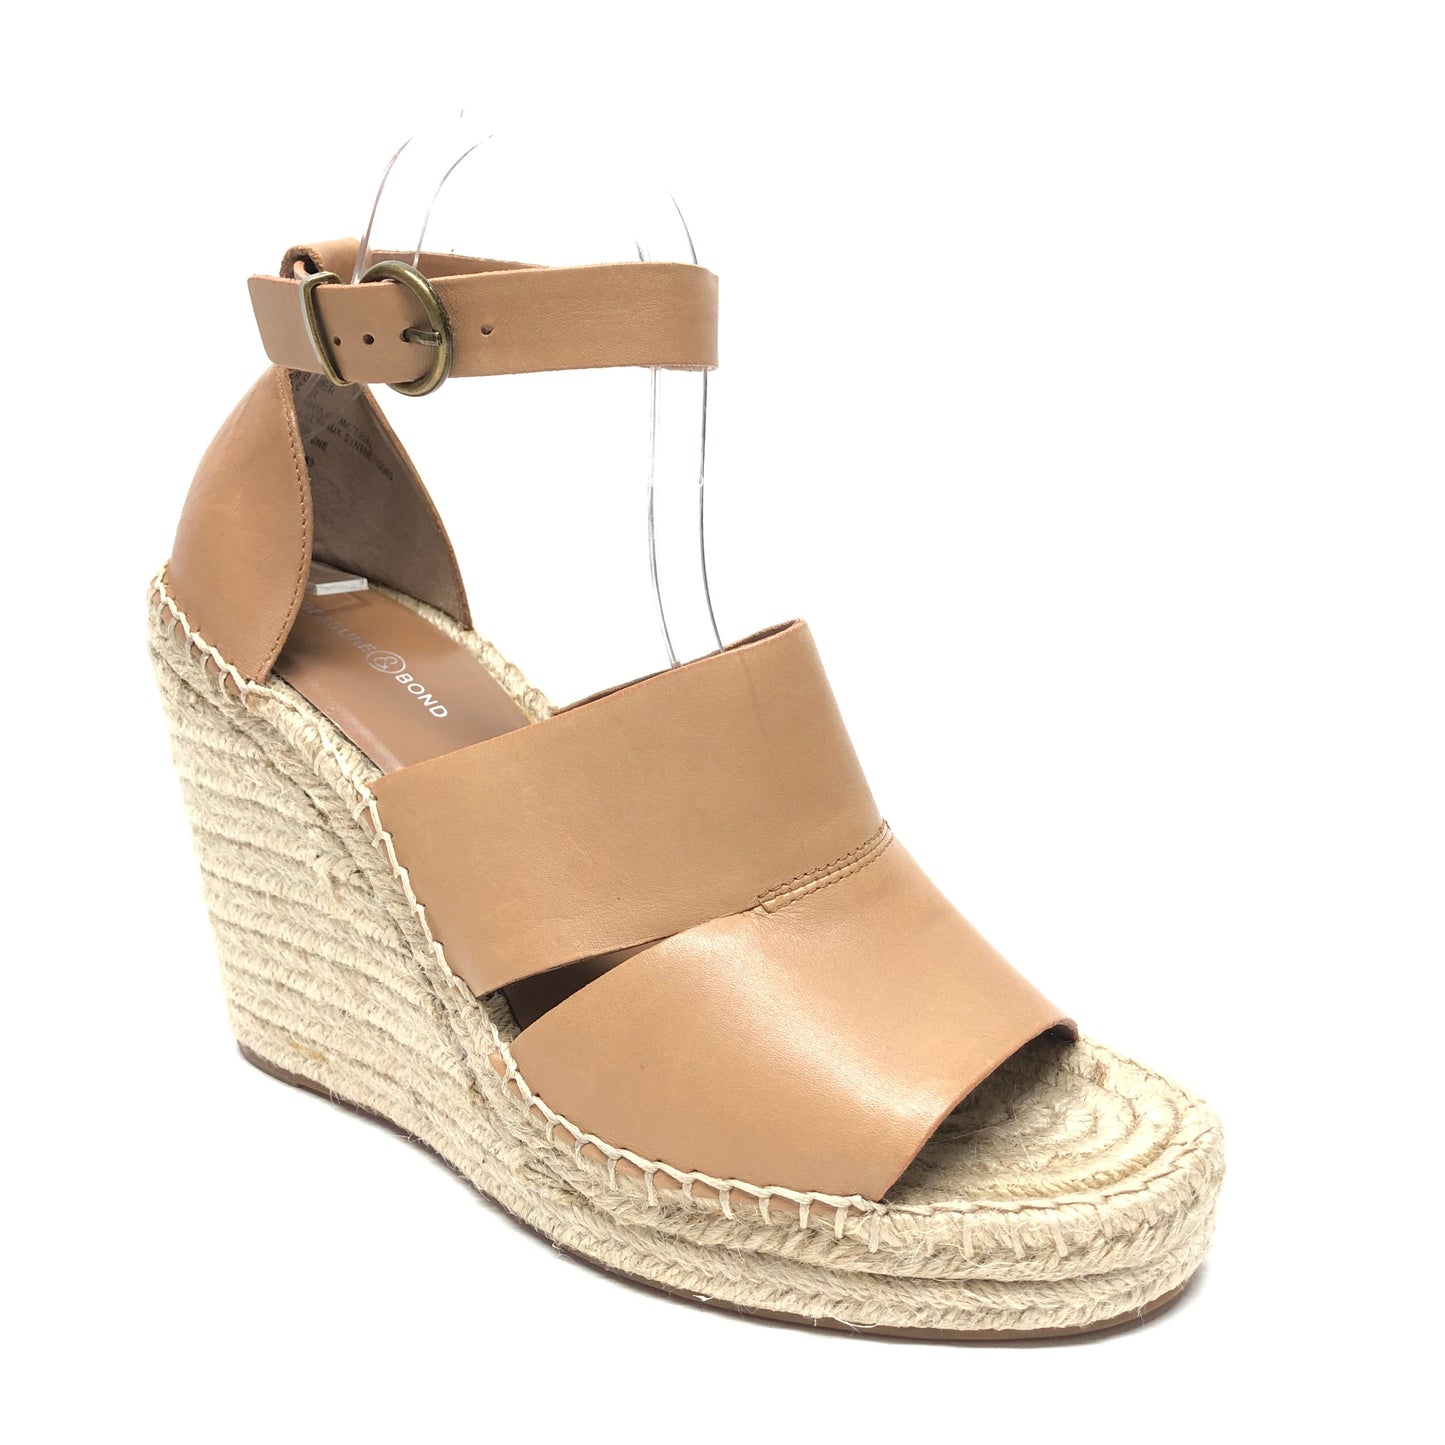 Sandals Heels Wedge By Treasure And Bond  Size: 10